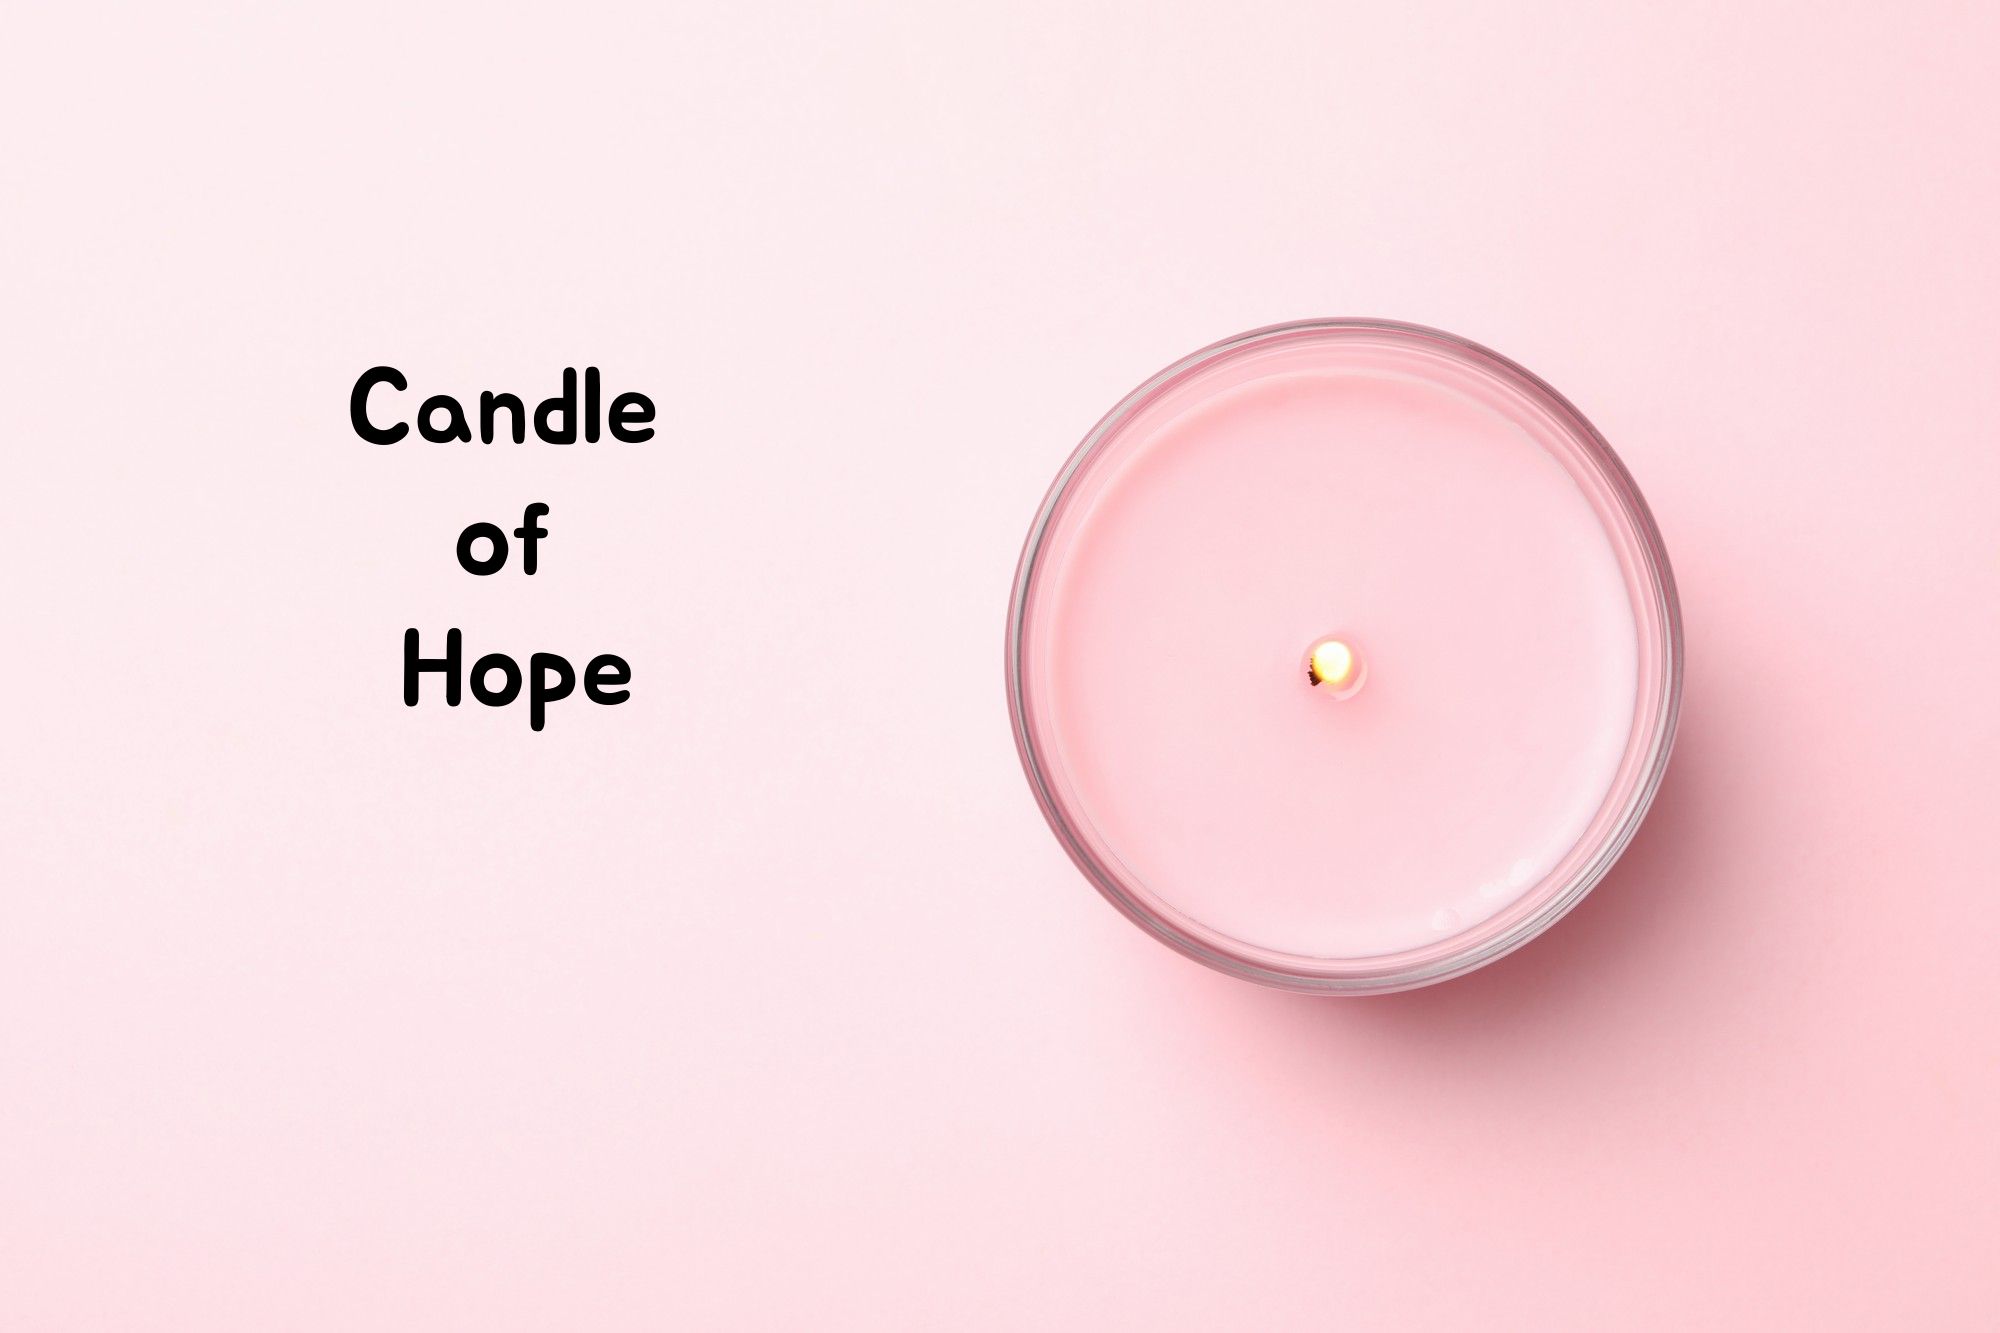 Candle of hope, philosophy park